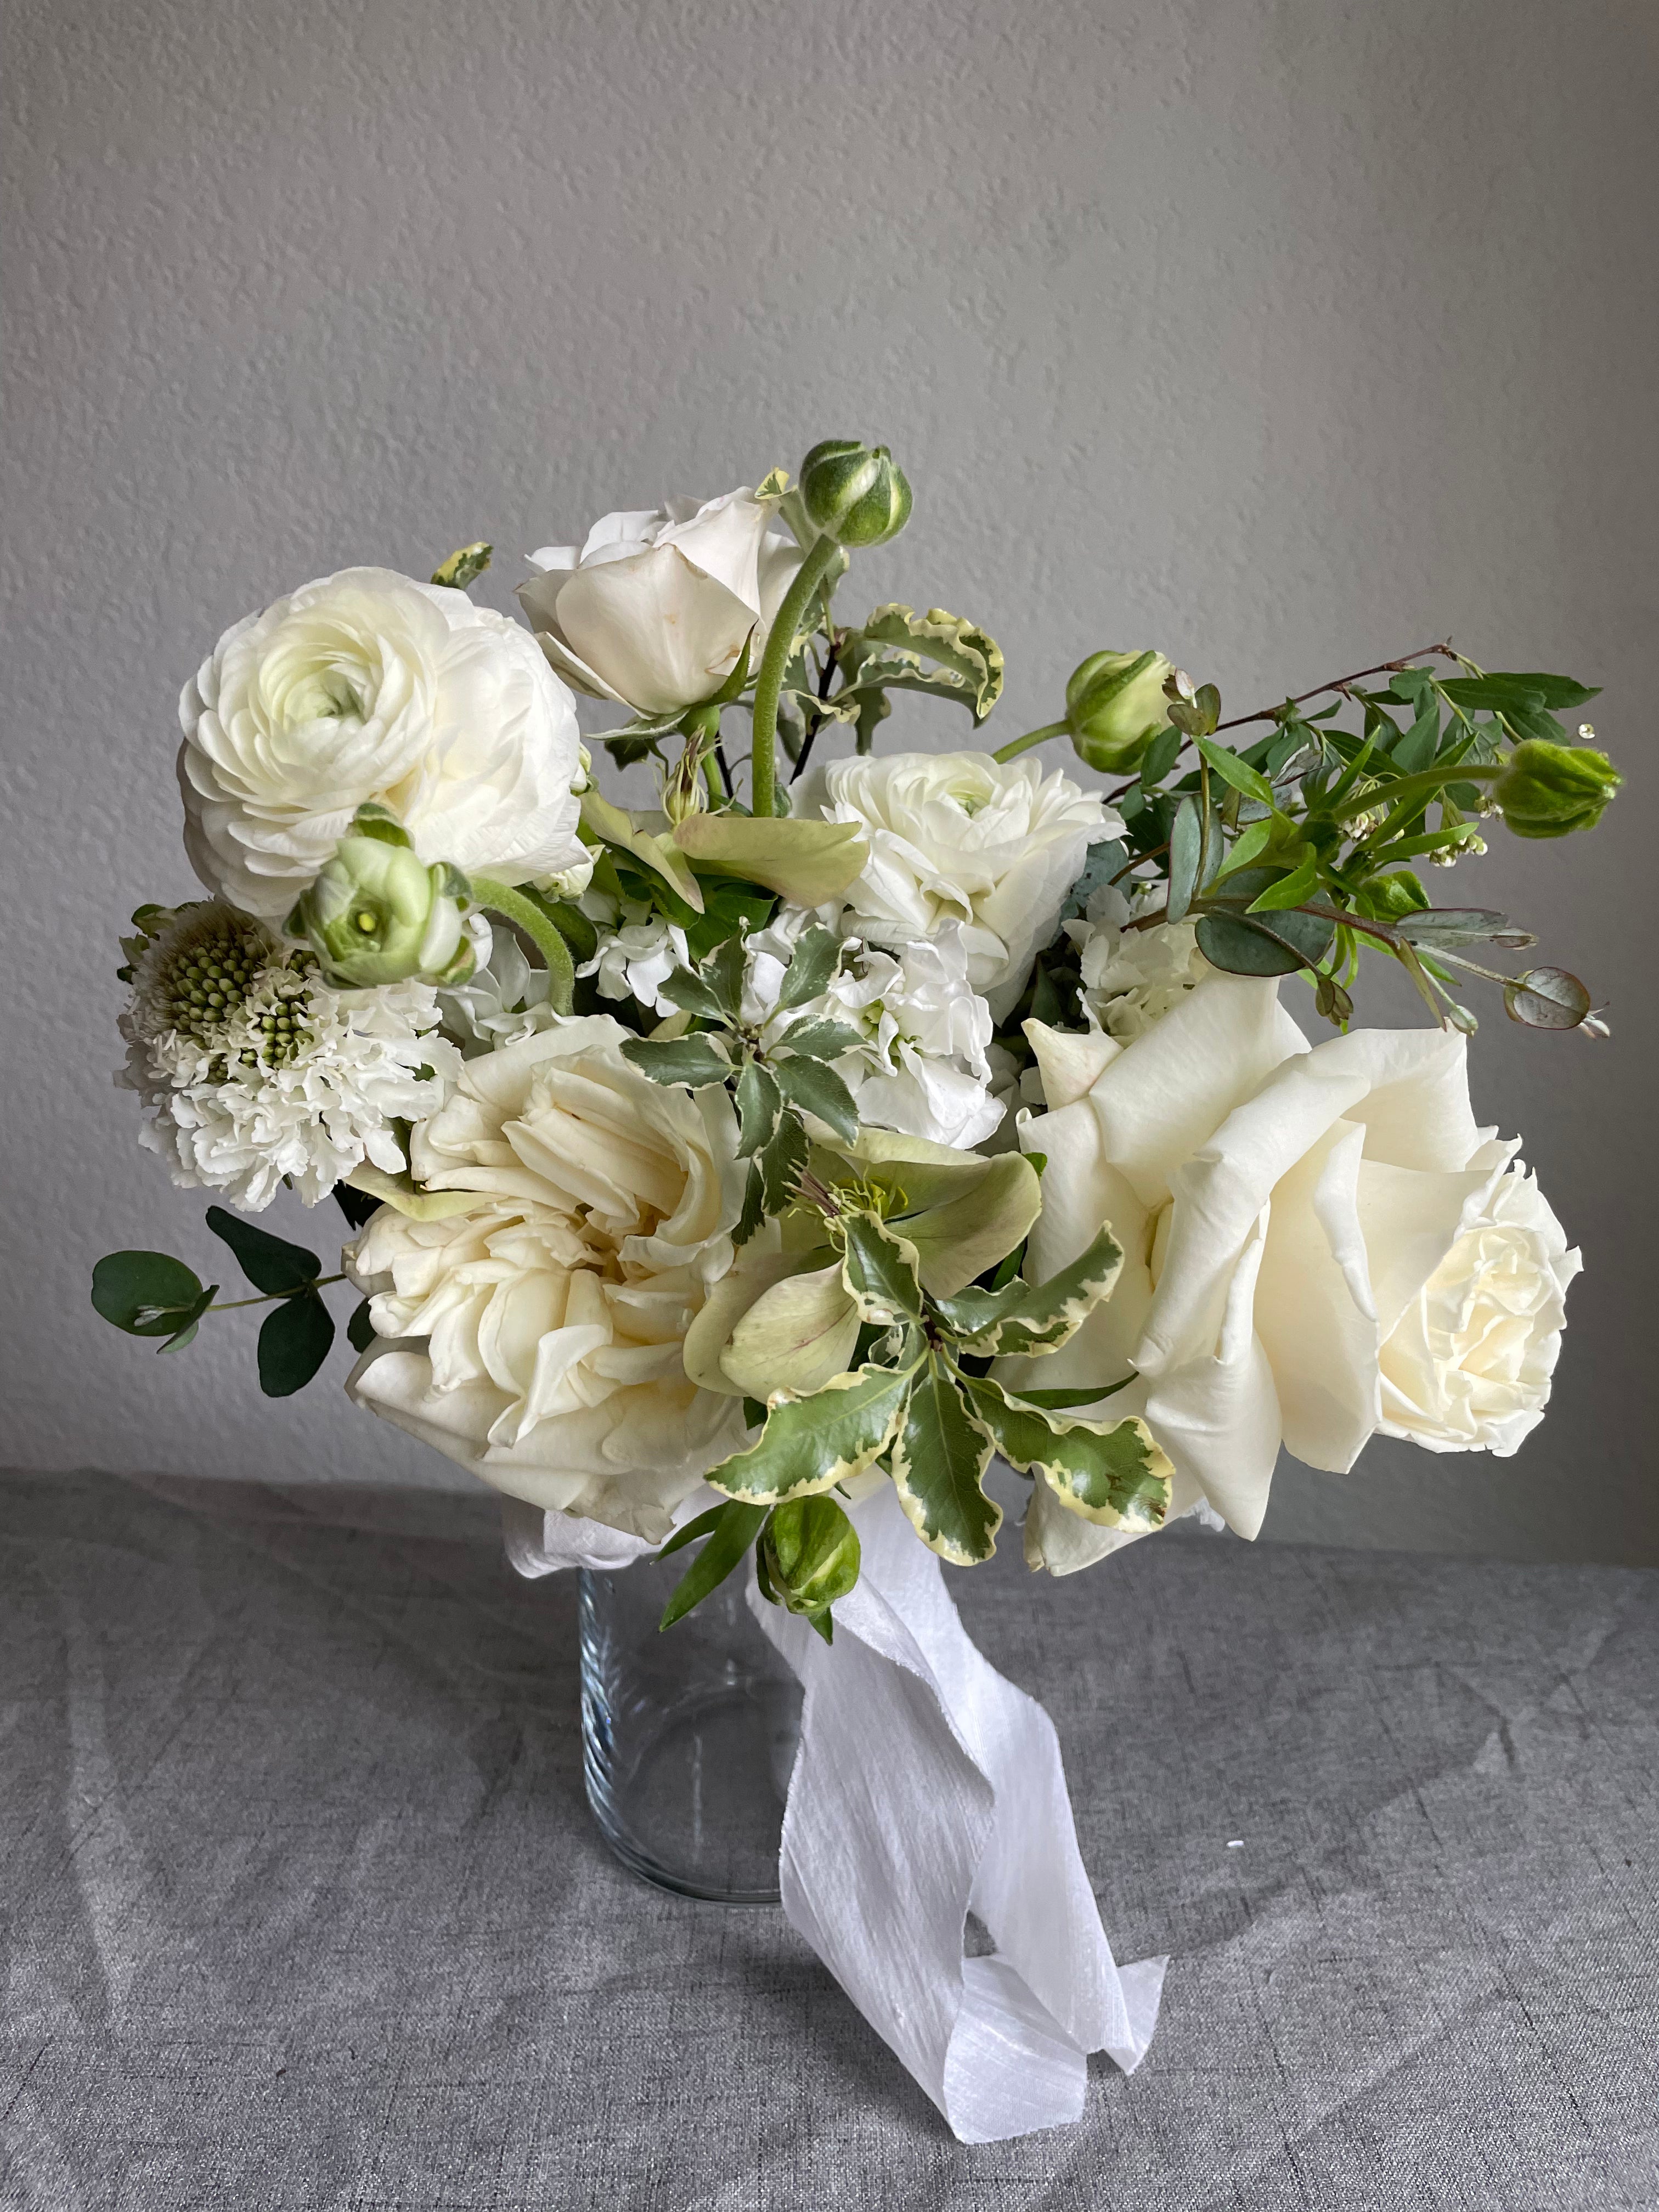 locally sourced classic white and green bridesmaid bouquet